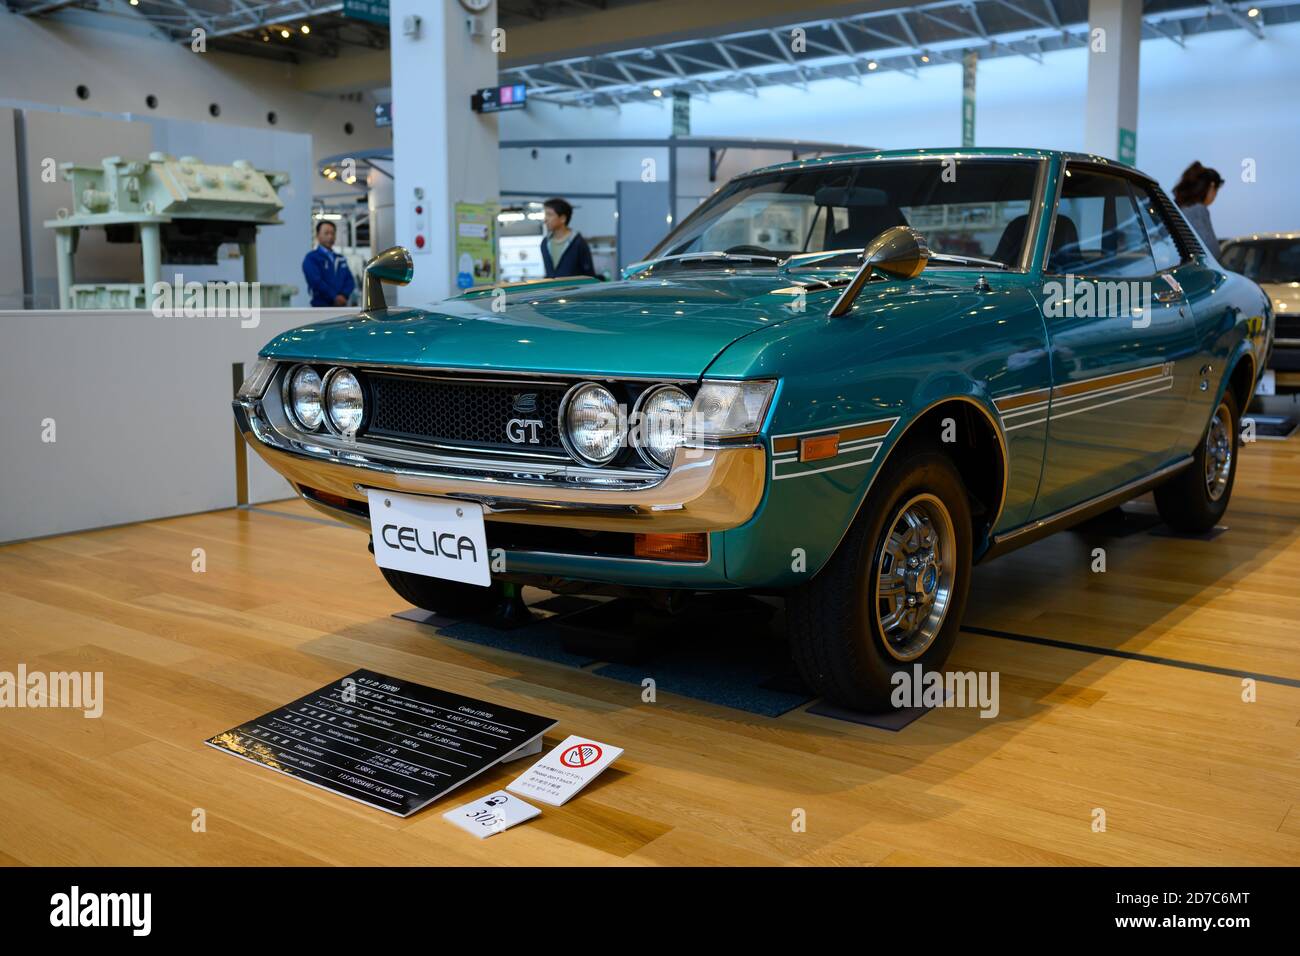 Nagoya / Japan Nov 26 2019 :  Classic sports car model Celica parked in the hall of the Memorial Museum of Industry and Technology. Stock Photo